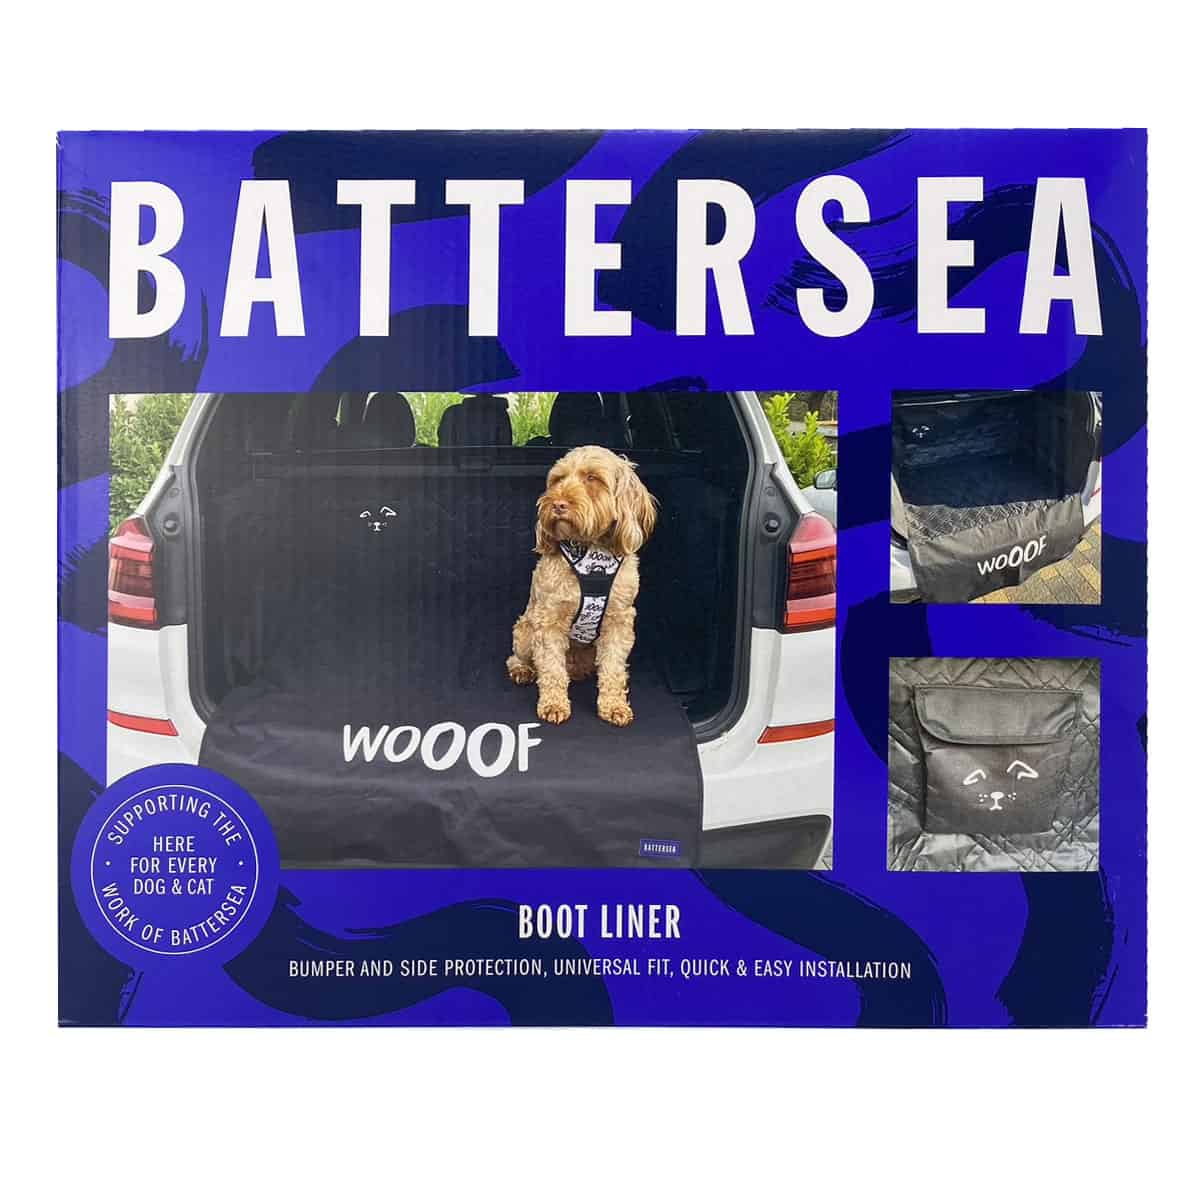 The Battersea Car Boot Liner: Protect your car interior from dirt, scratches & odour - Packaging